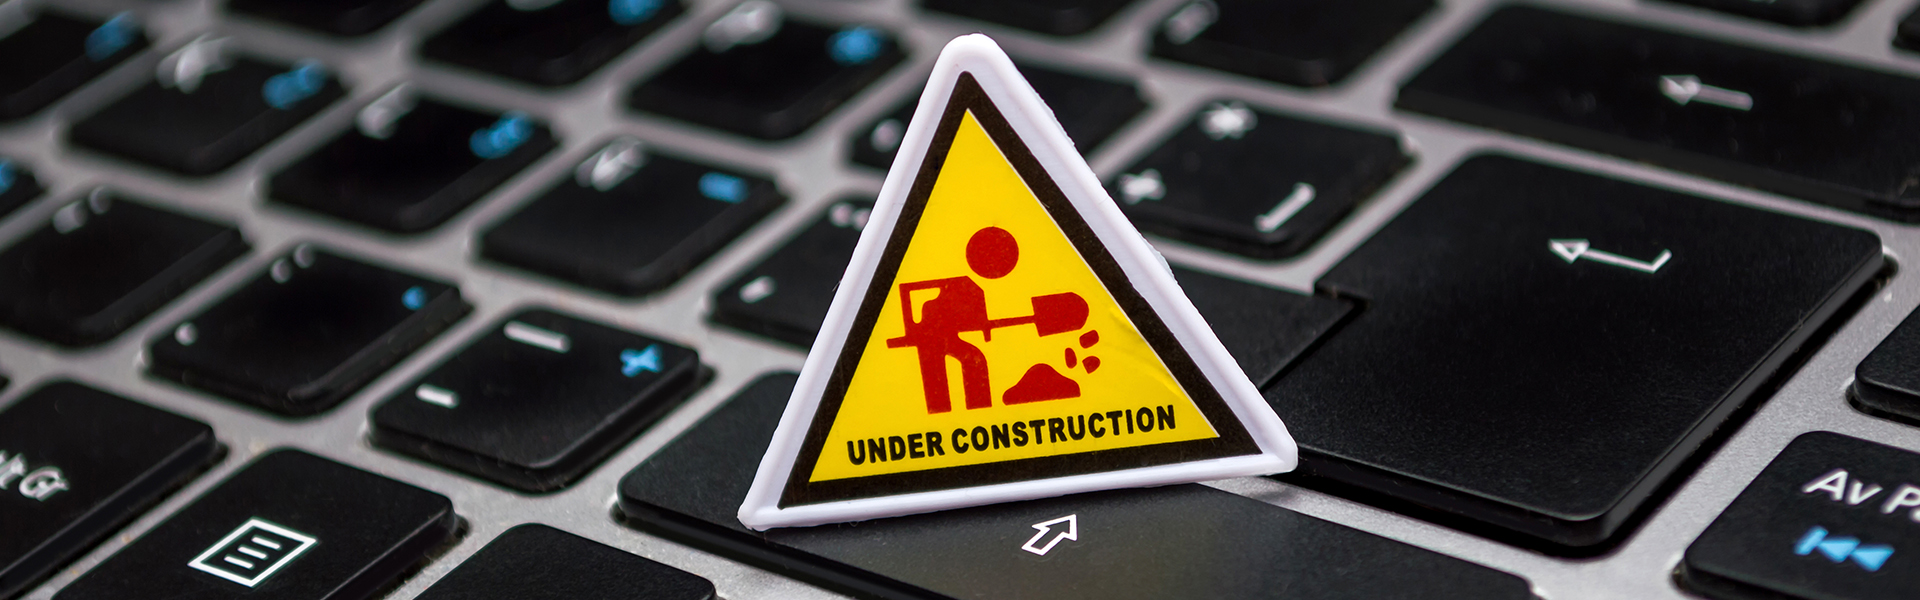 under construction icon displayed on top of a laptop keyboard.